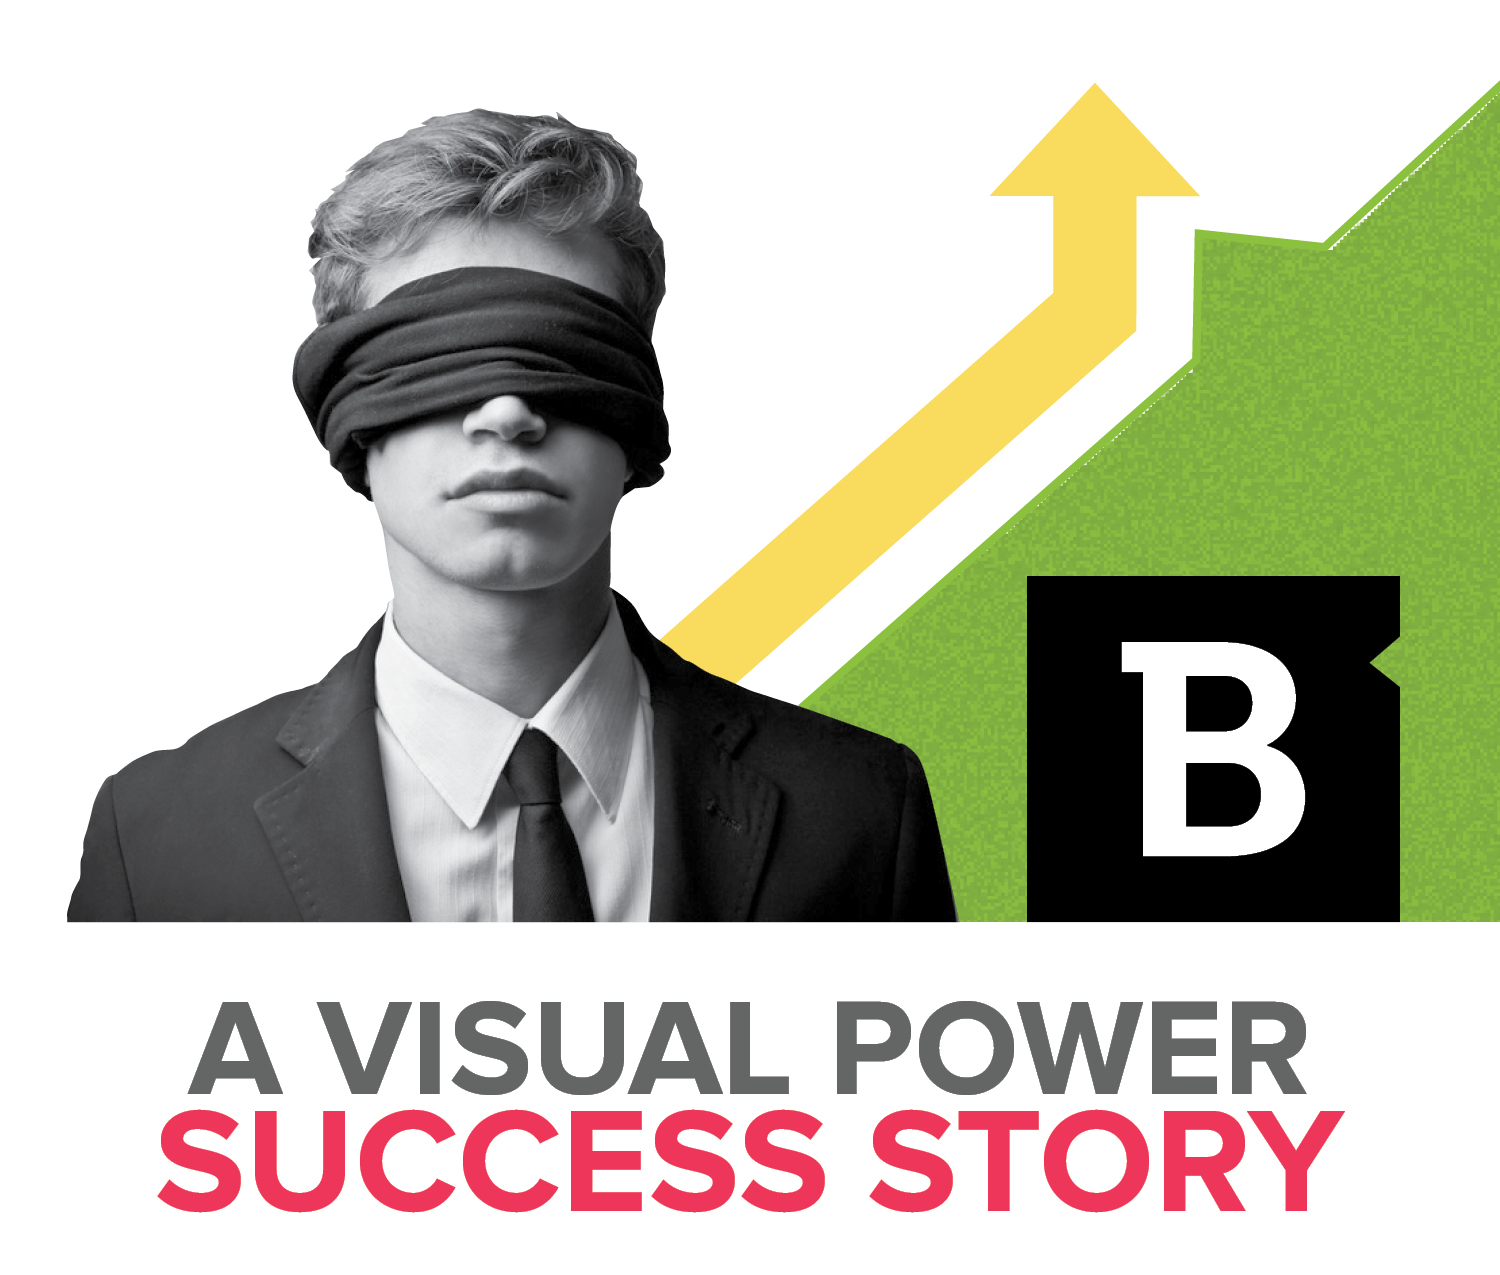 Content marketing is less likely to succeed without visuals and our client proves it.